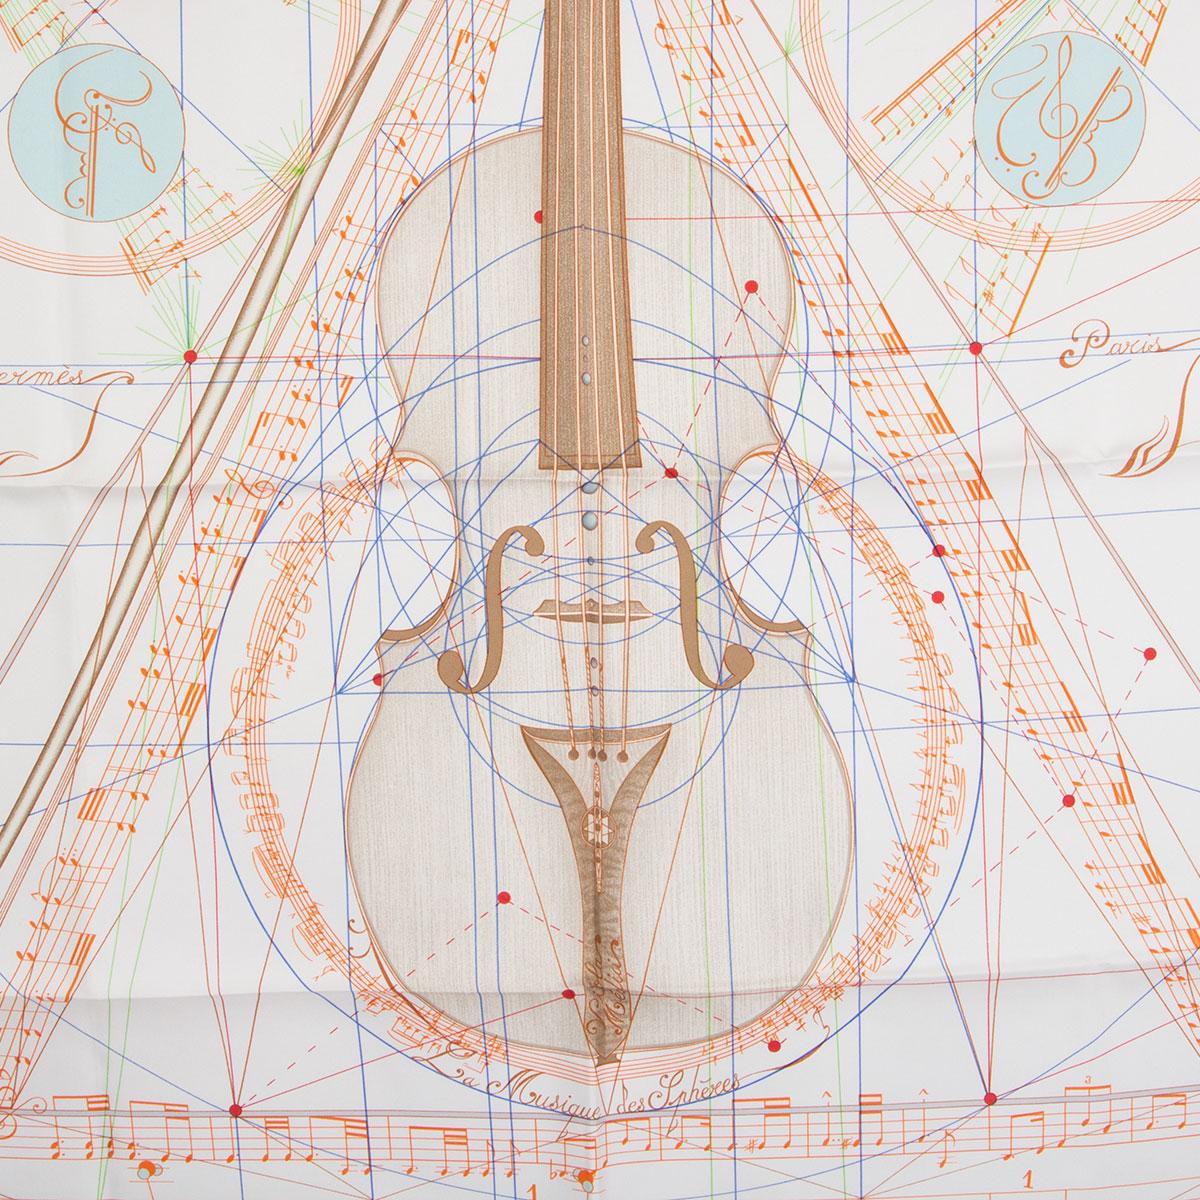 100% authentic Hermes 'La Musique des Spheres 90' scarf by Zoe Pauwels in white silk twill (100%) with details in blue, orange and green. Has been worn and is in excellent condition.

Width 90cm (35.1in)
Height 90cm (35.1in)

All our listings